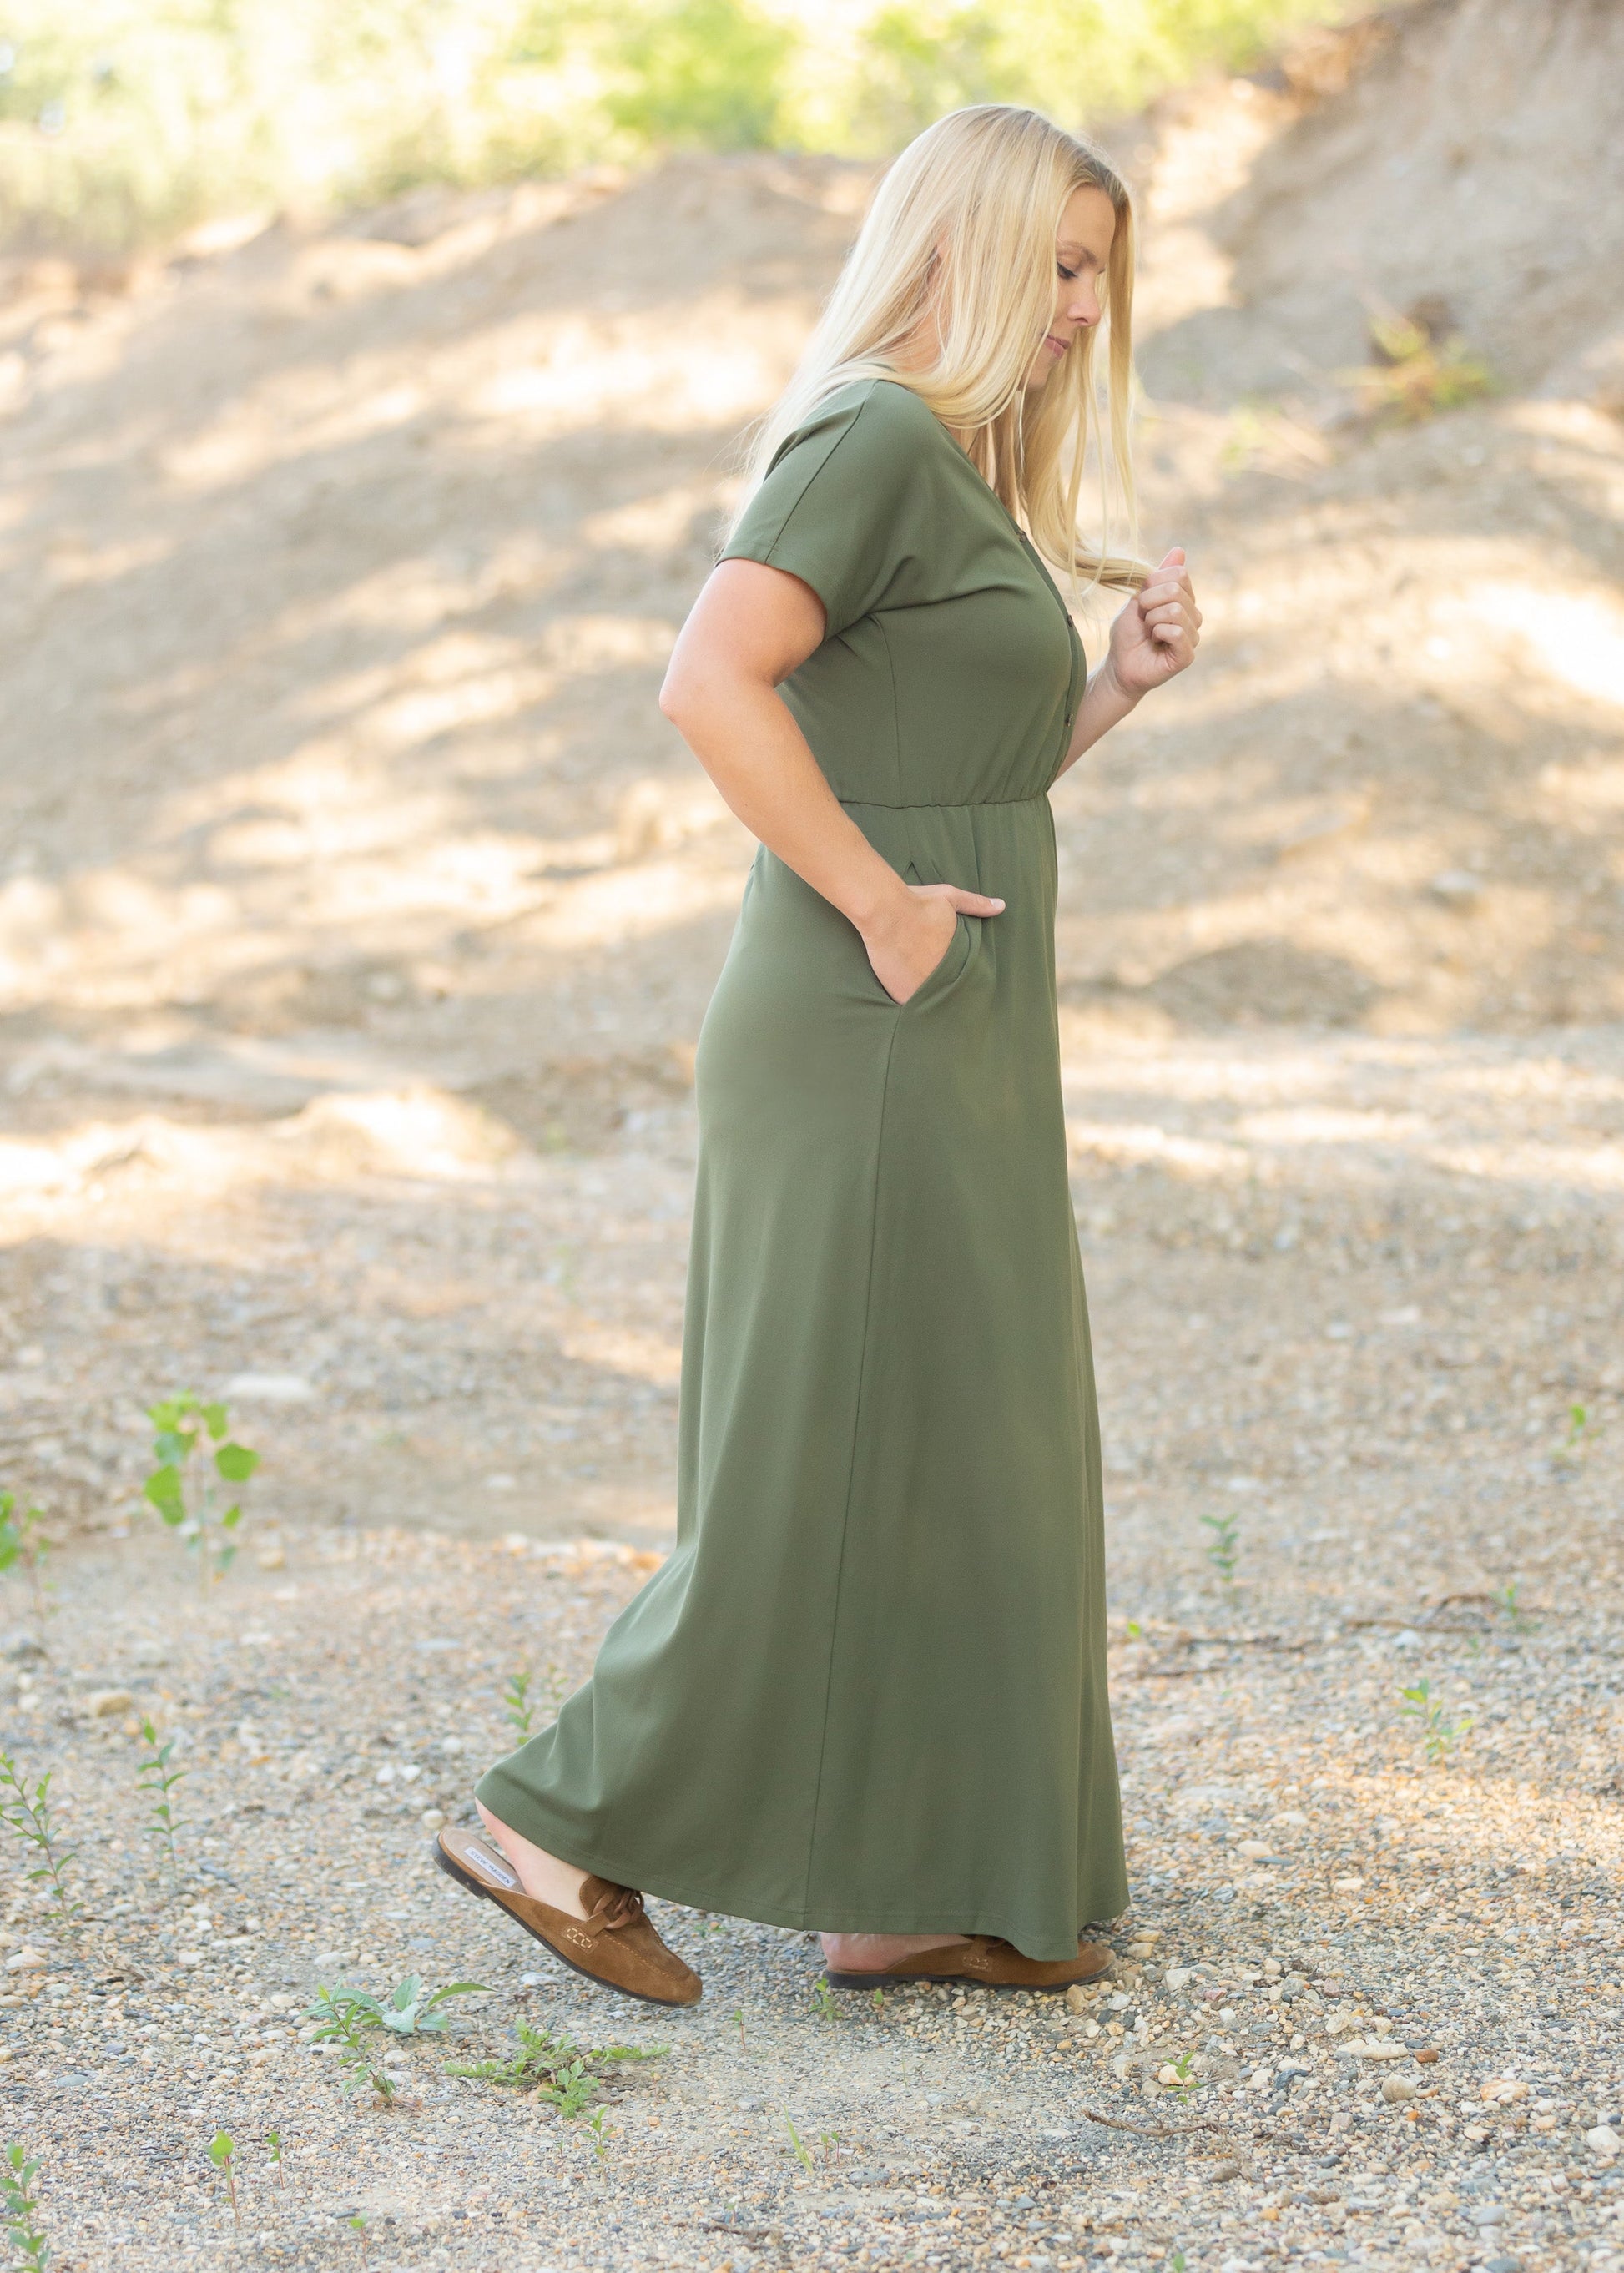 Made from an elevated ponte fabric, the Ella Cinched Waist Maxi Dress is an Inherit Design that will take you from season to season. There are non-functioning tortoise shell buttons down the front to ensure a modest fit. The top of the dress has a dolman fit and drop arms to keep you comfortable and give a flattering fit! The skirt of the dress has a slight a-line making this a super versatile dress that you can feel confident wearing.